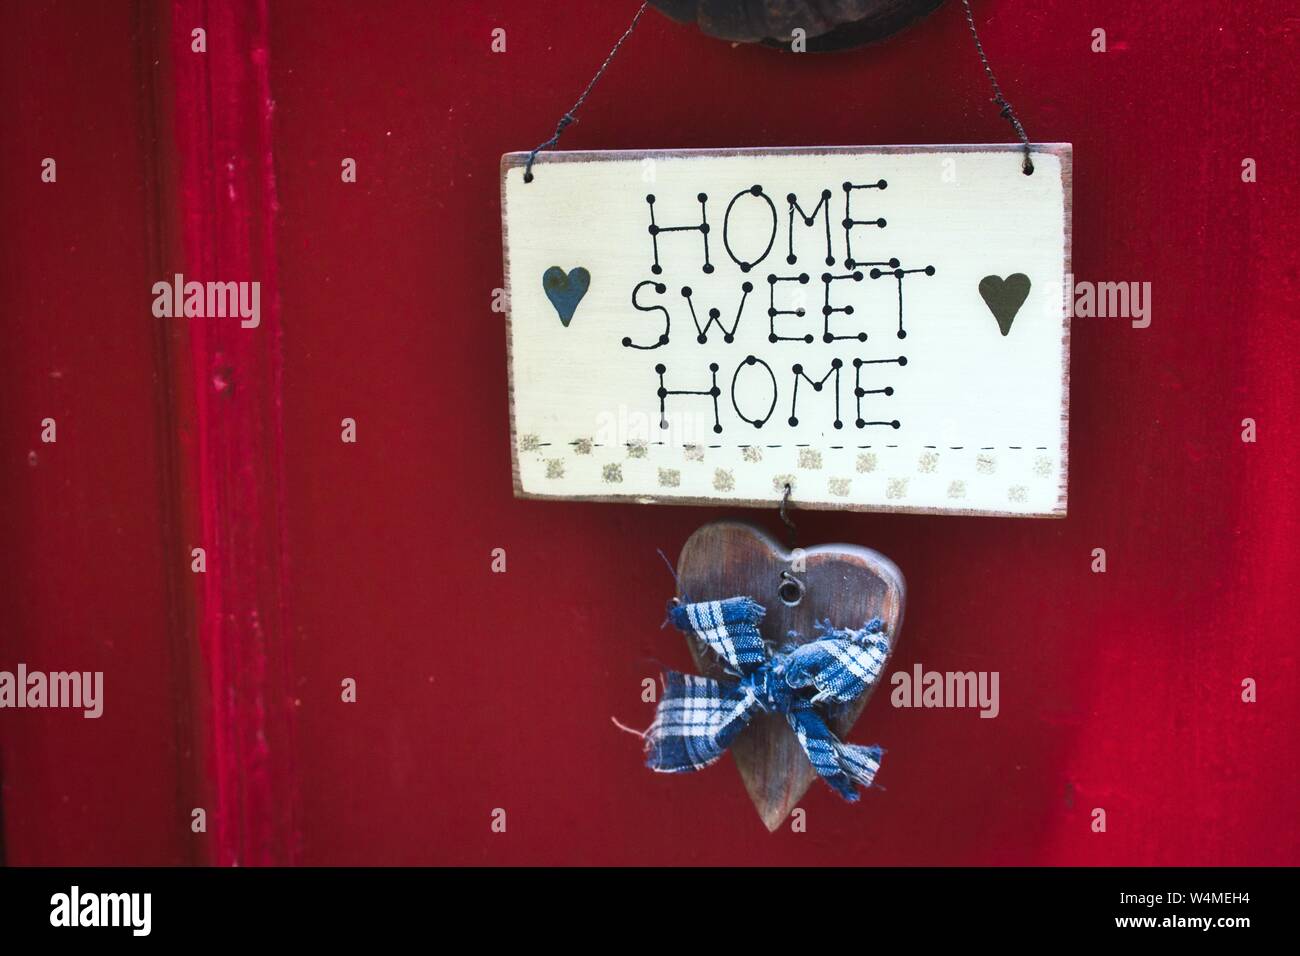 A cute Home Sweet Home sign hanging on a bright red door Stock Photo